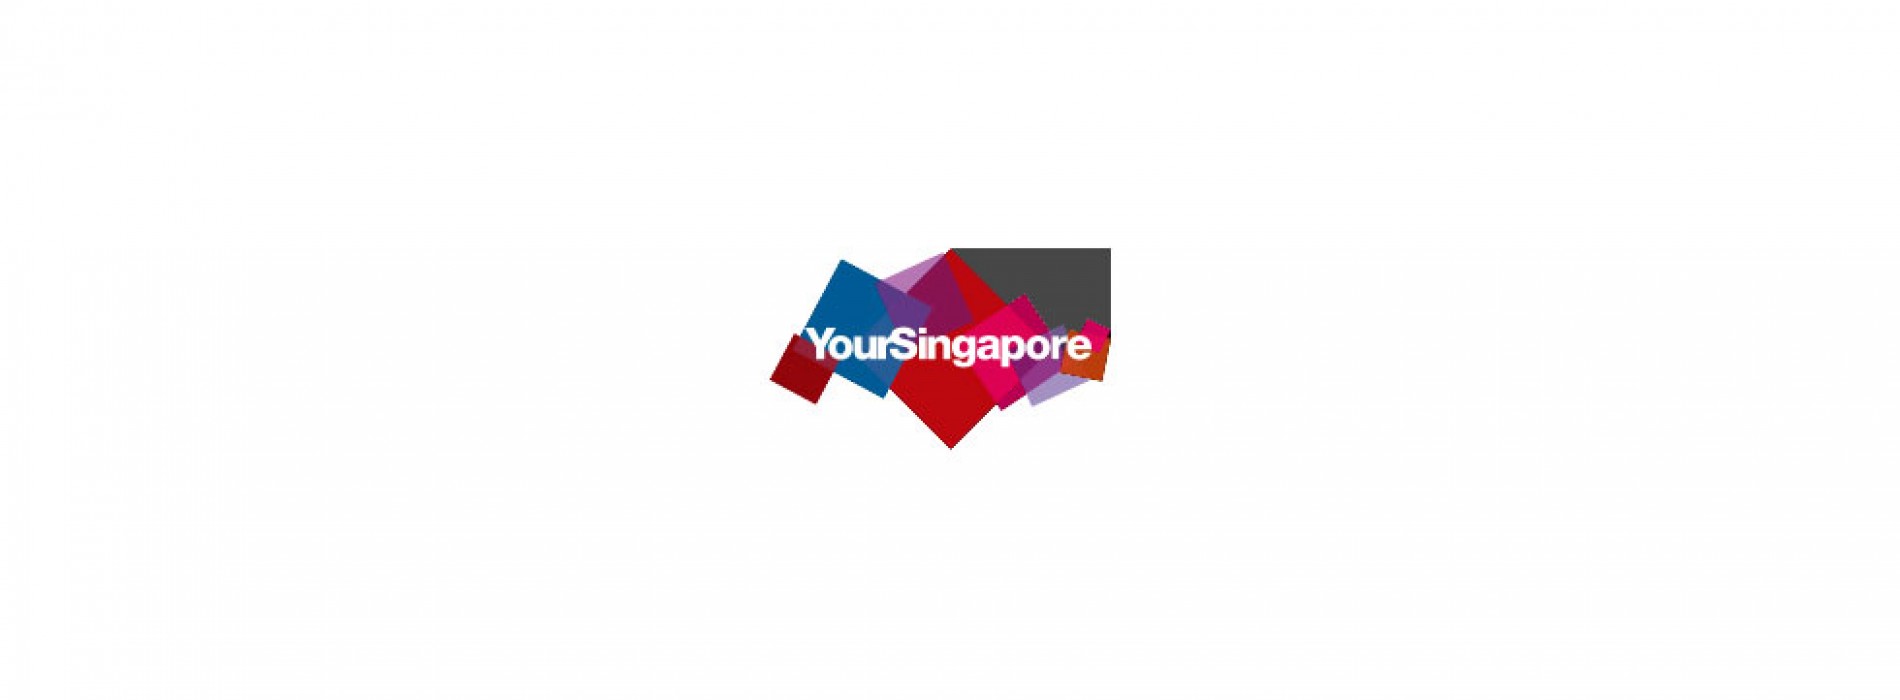 Business events boost Singapore’s ambition to be technology thought leader